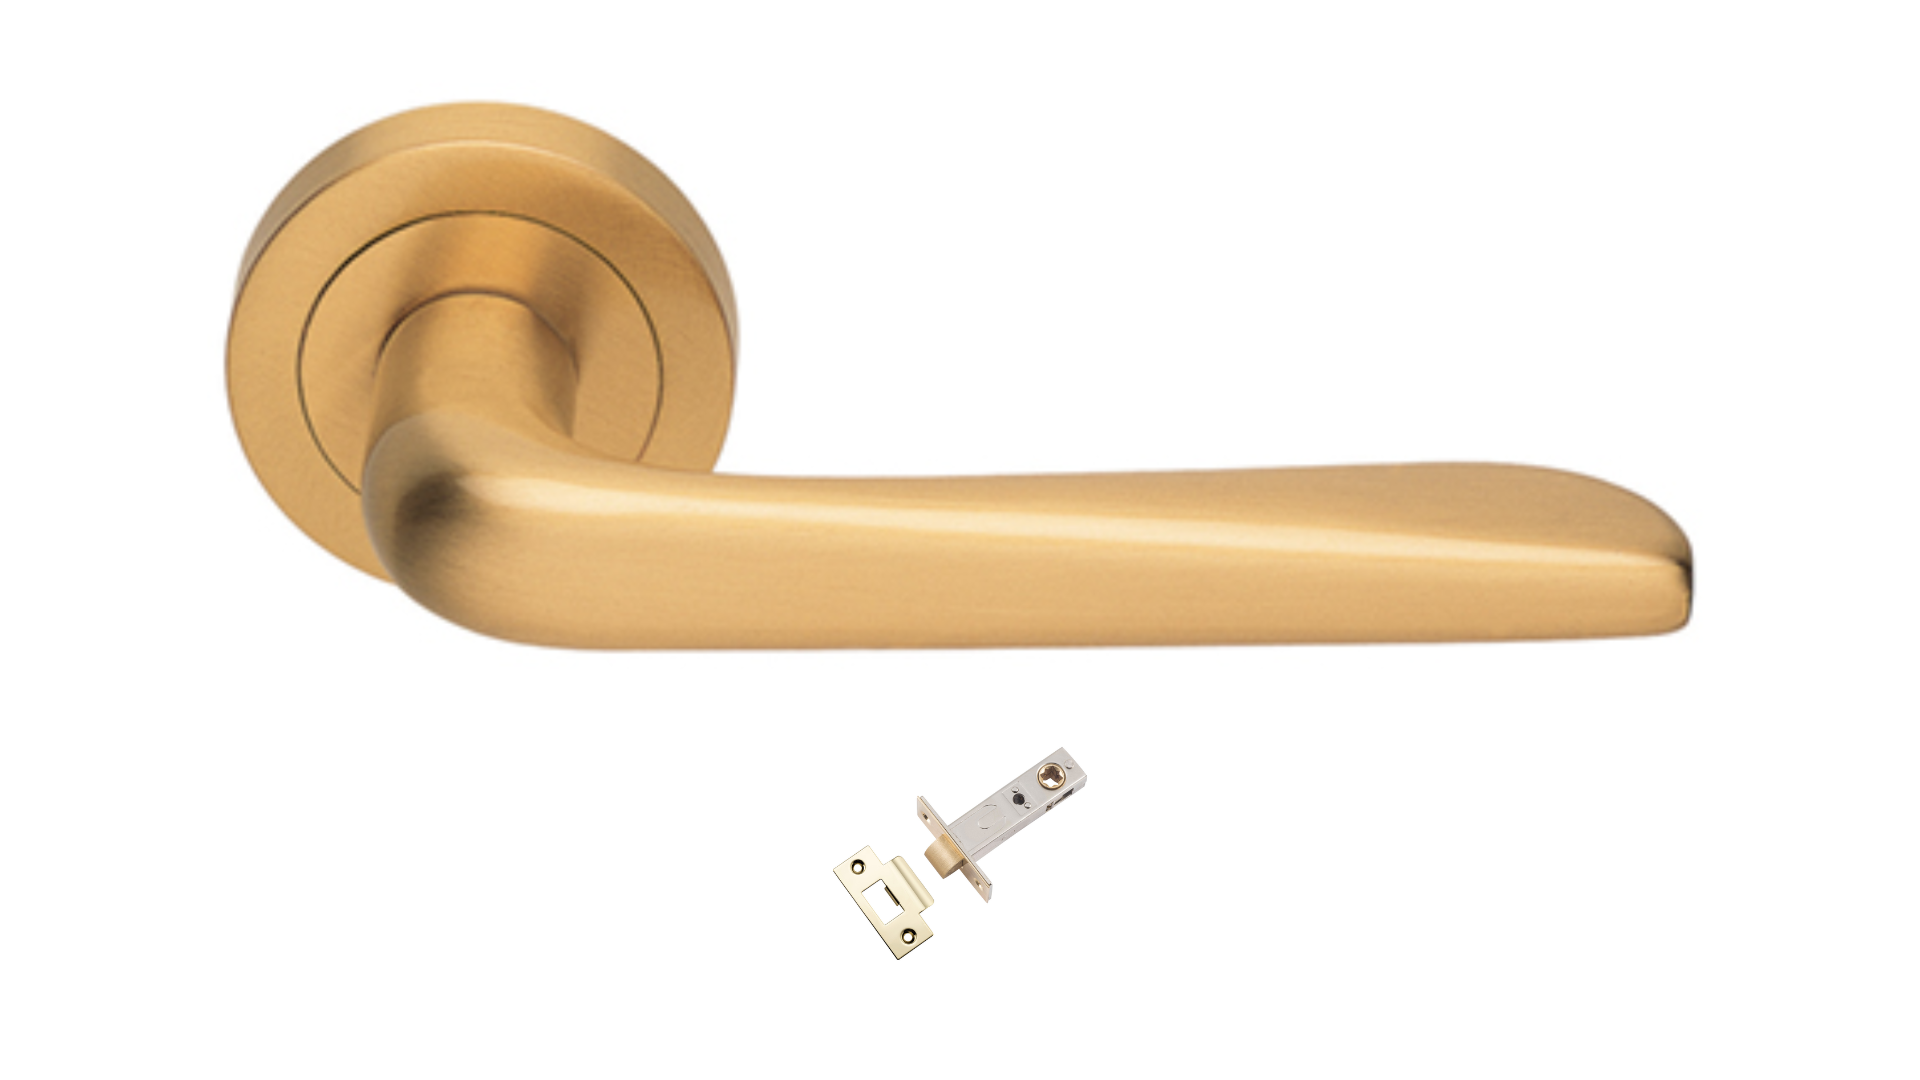 Product picture of the Petra Satin Brass Door Handle with separate privacy tubular latch on a white background.